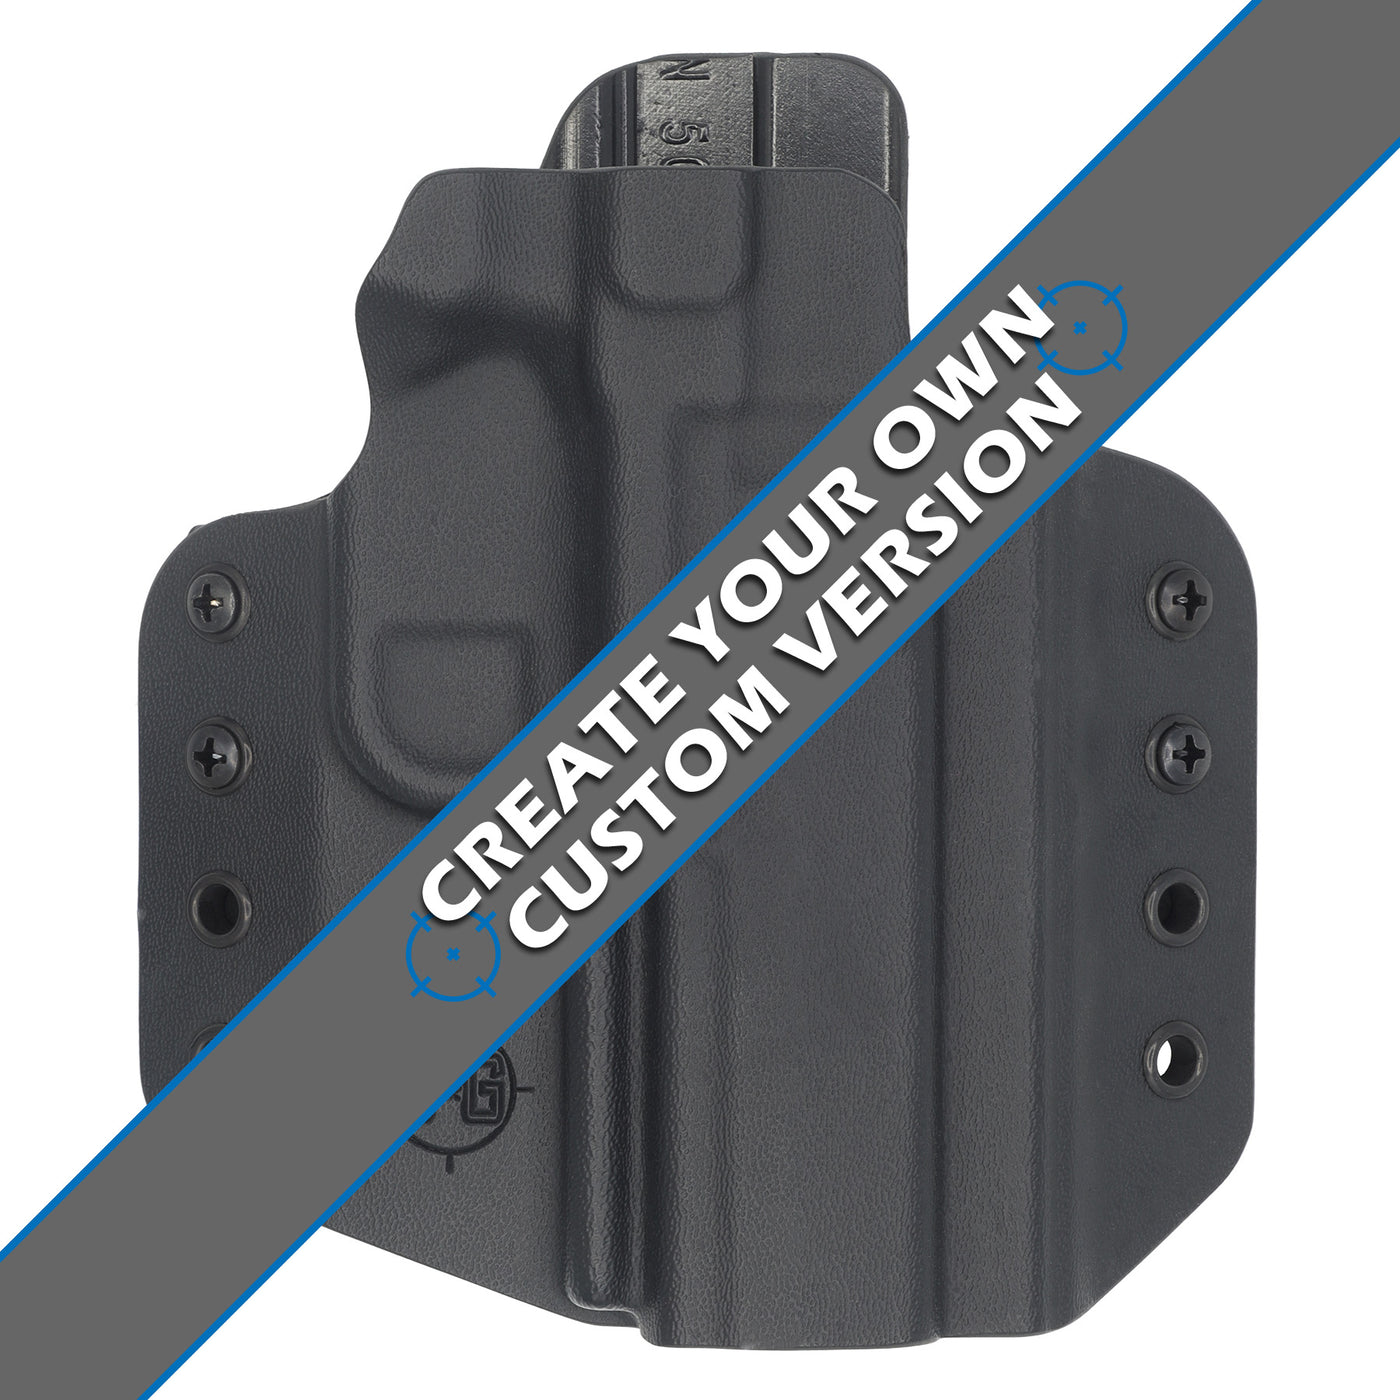 This is the custom C&G Holsters outside the waistband holster for the FN 509T (Tactical).